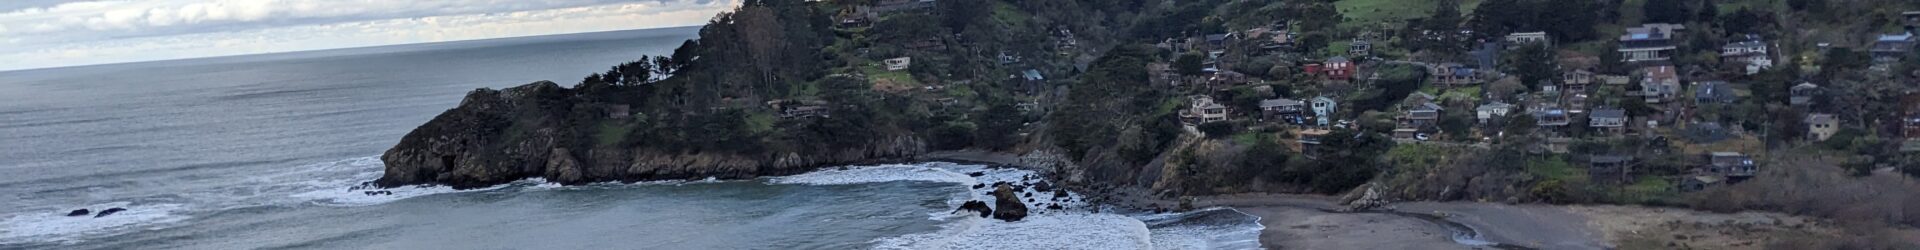 Hiking: Tennessee valley and Muir beach